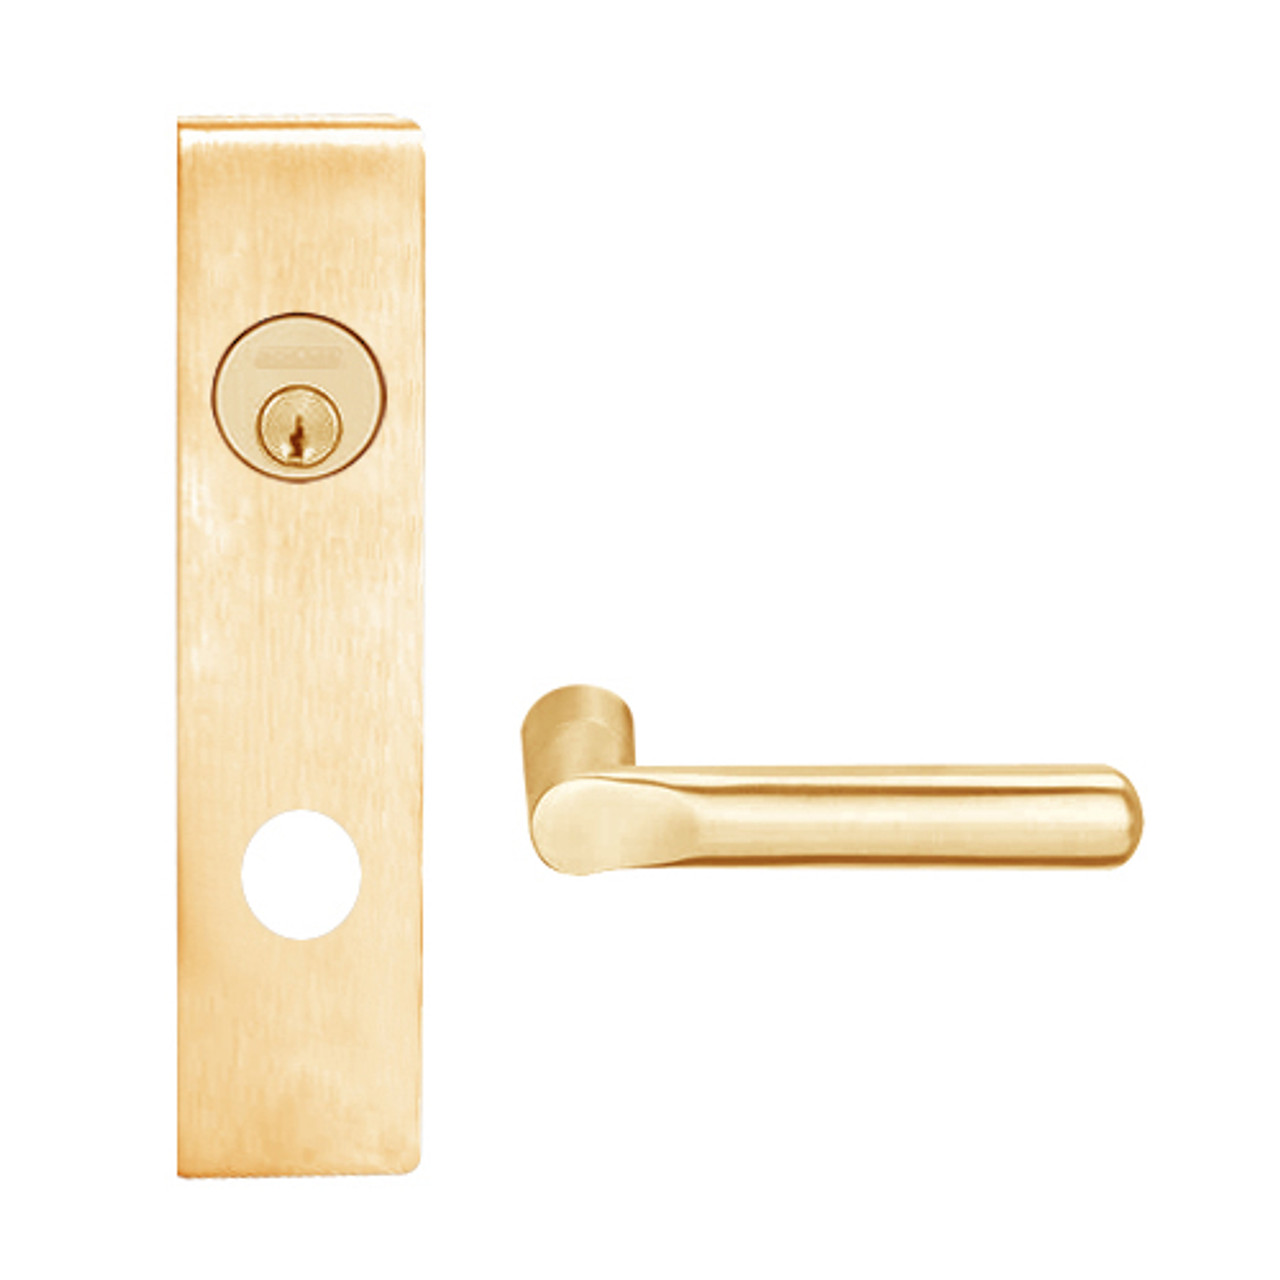 L9453L-18L-612 Schlage L Series Less Cylinder Entrance with Deadbolt Commercial Mortise Lock with 18 Cast Lever Design in Satin Bronze